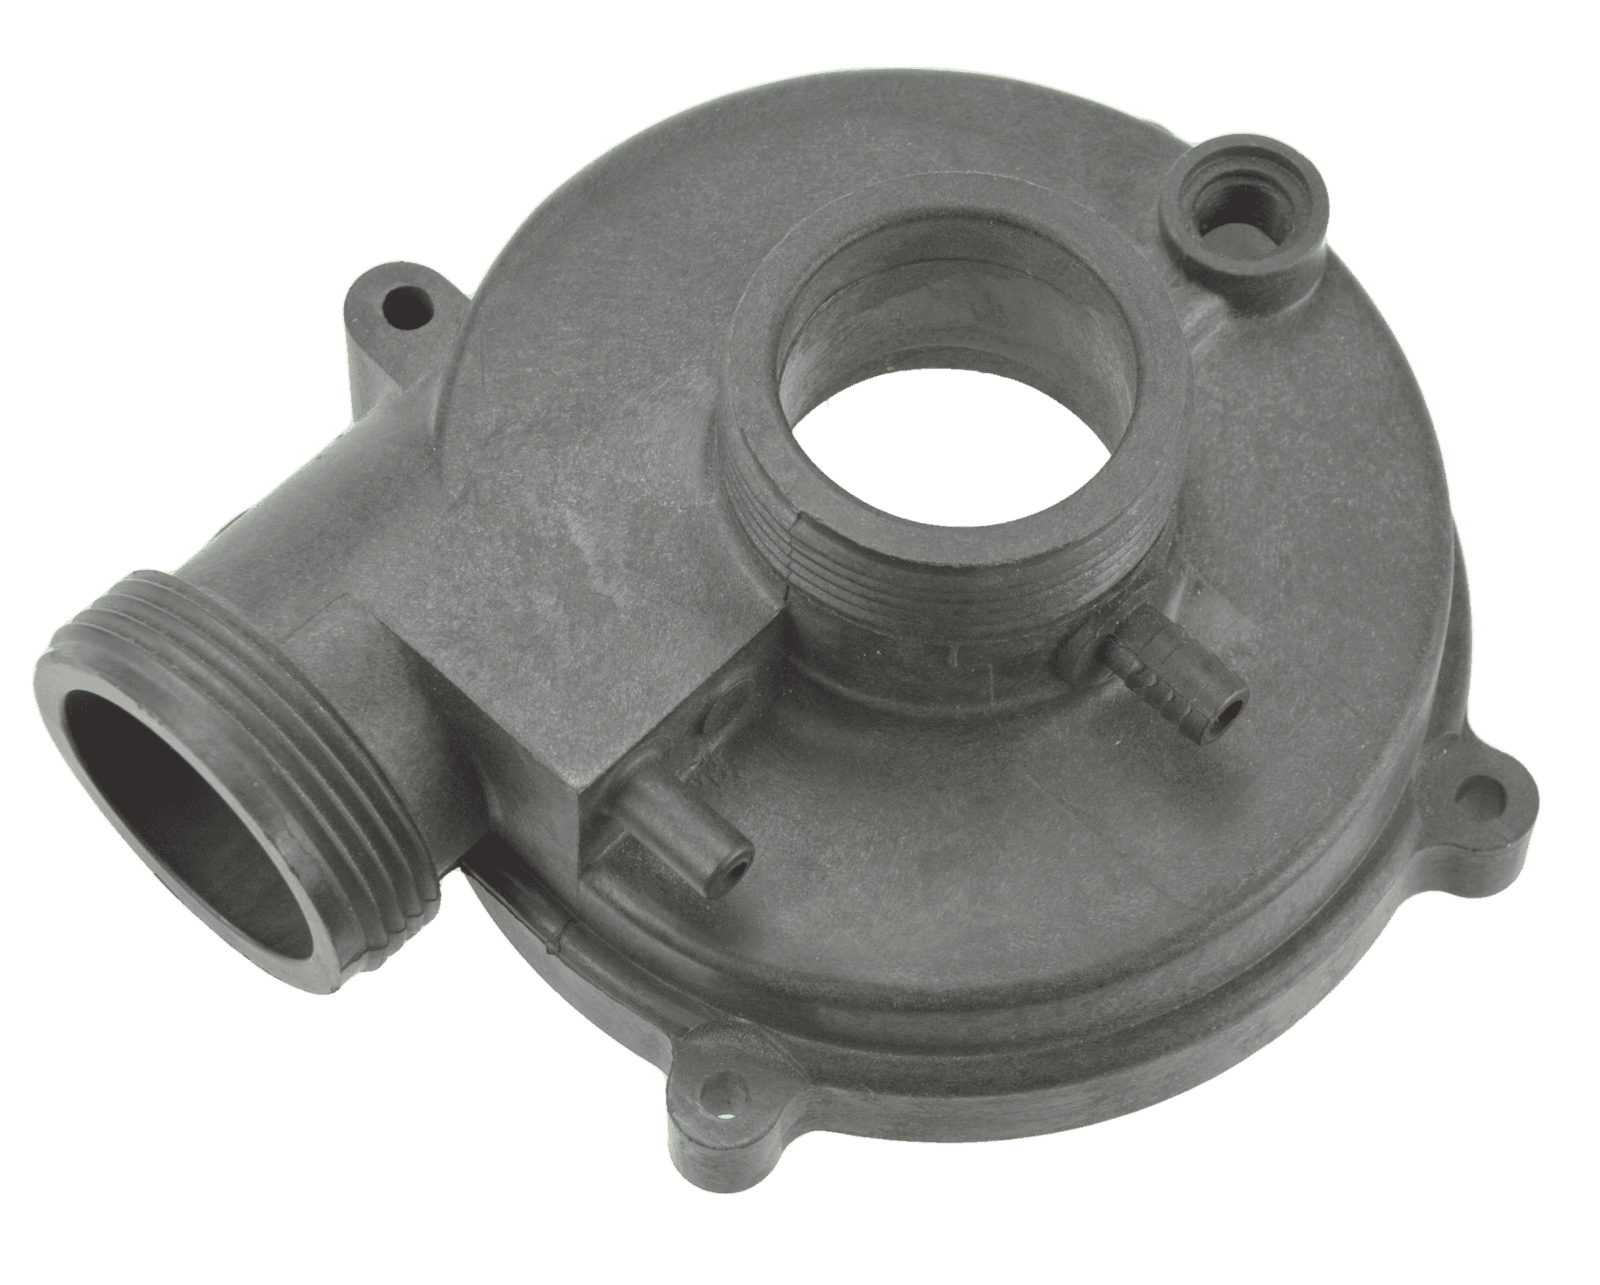 Balboa Vico Ultima Circulation Pump Front Housing Body - Replacement Part